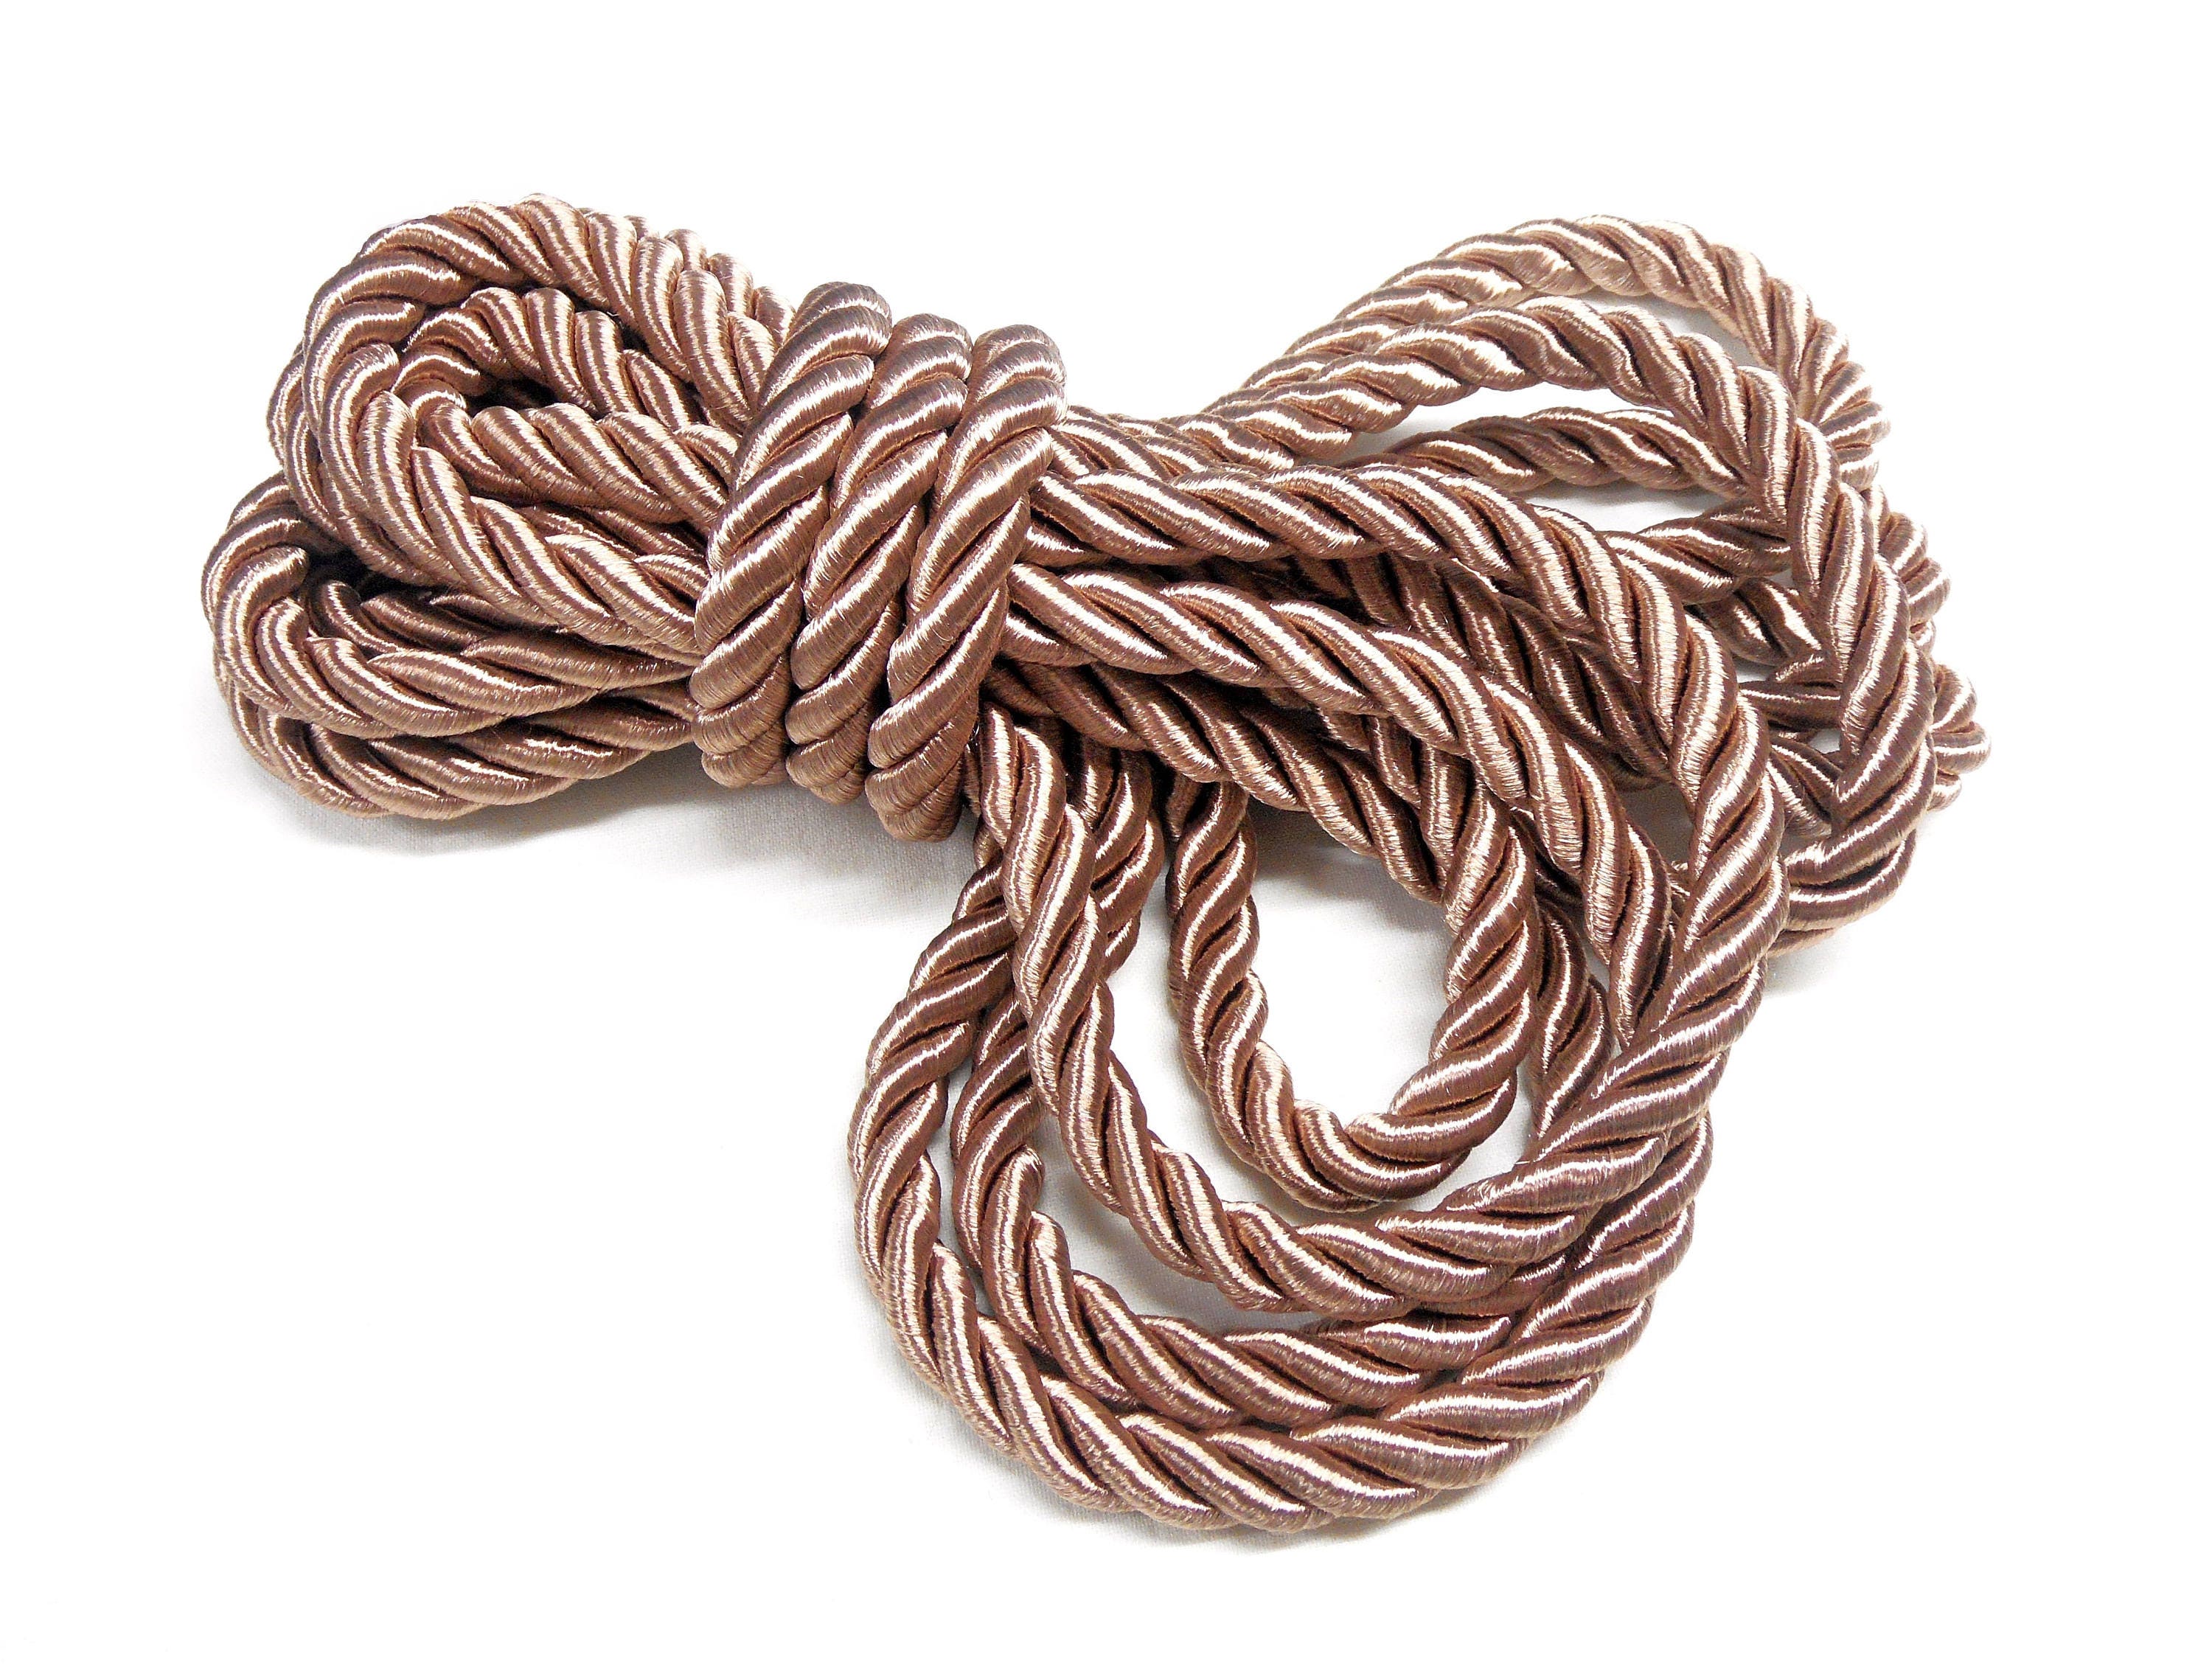 Buy Dark Beige Satin Twisted Cord, Wrapped Thread Cord, 9mm Rope Cord 1  Yard/ 0,92m Approx.1 Piece Online in India 